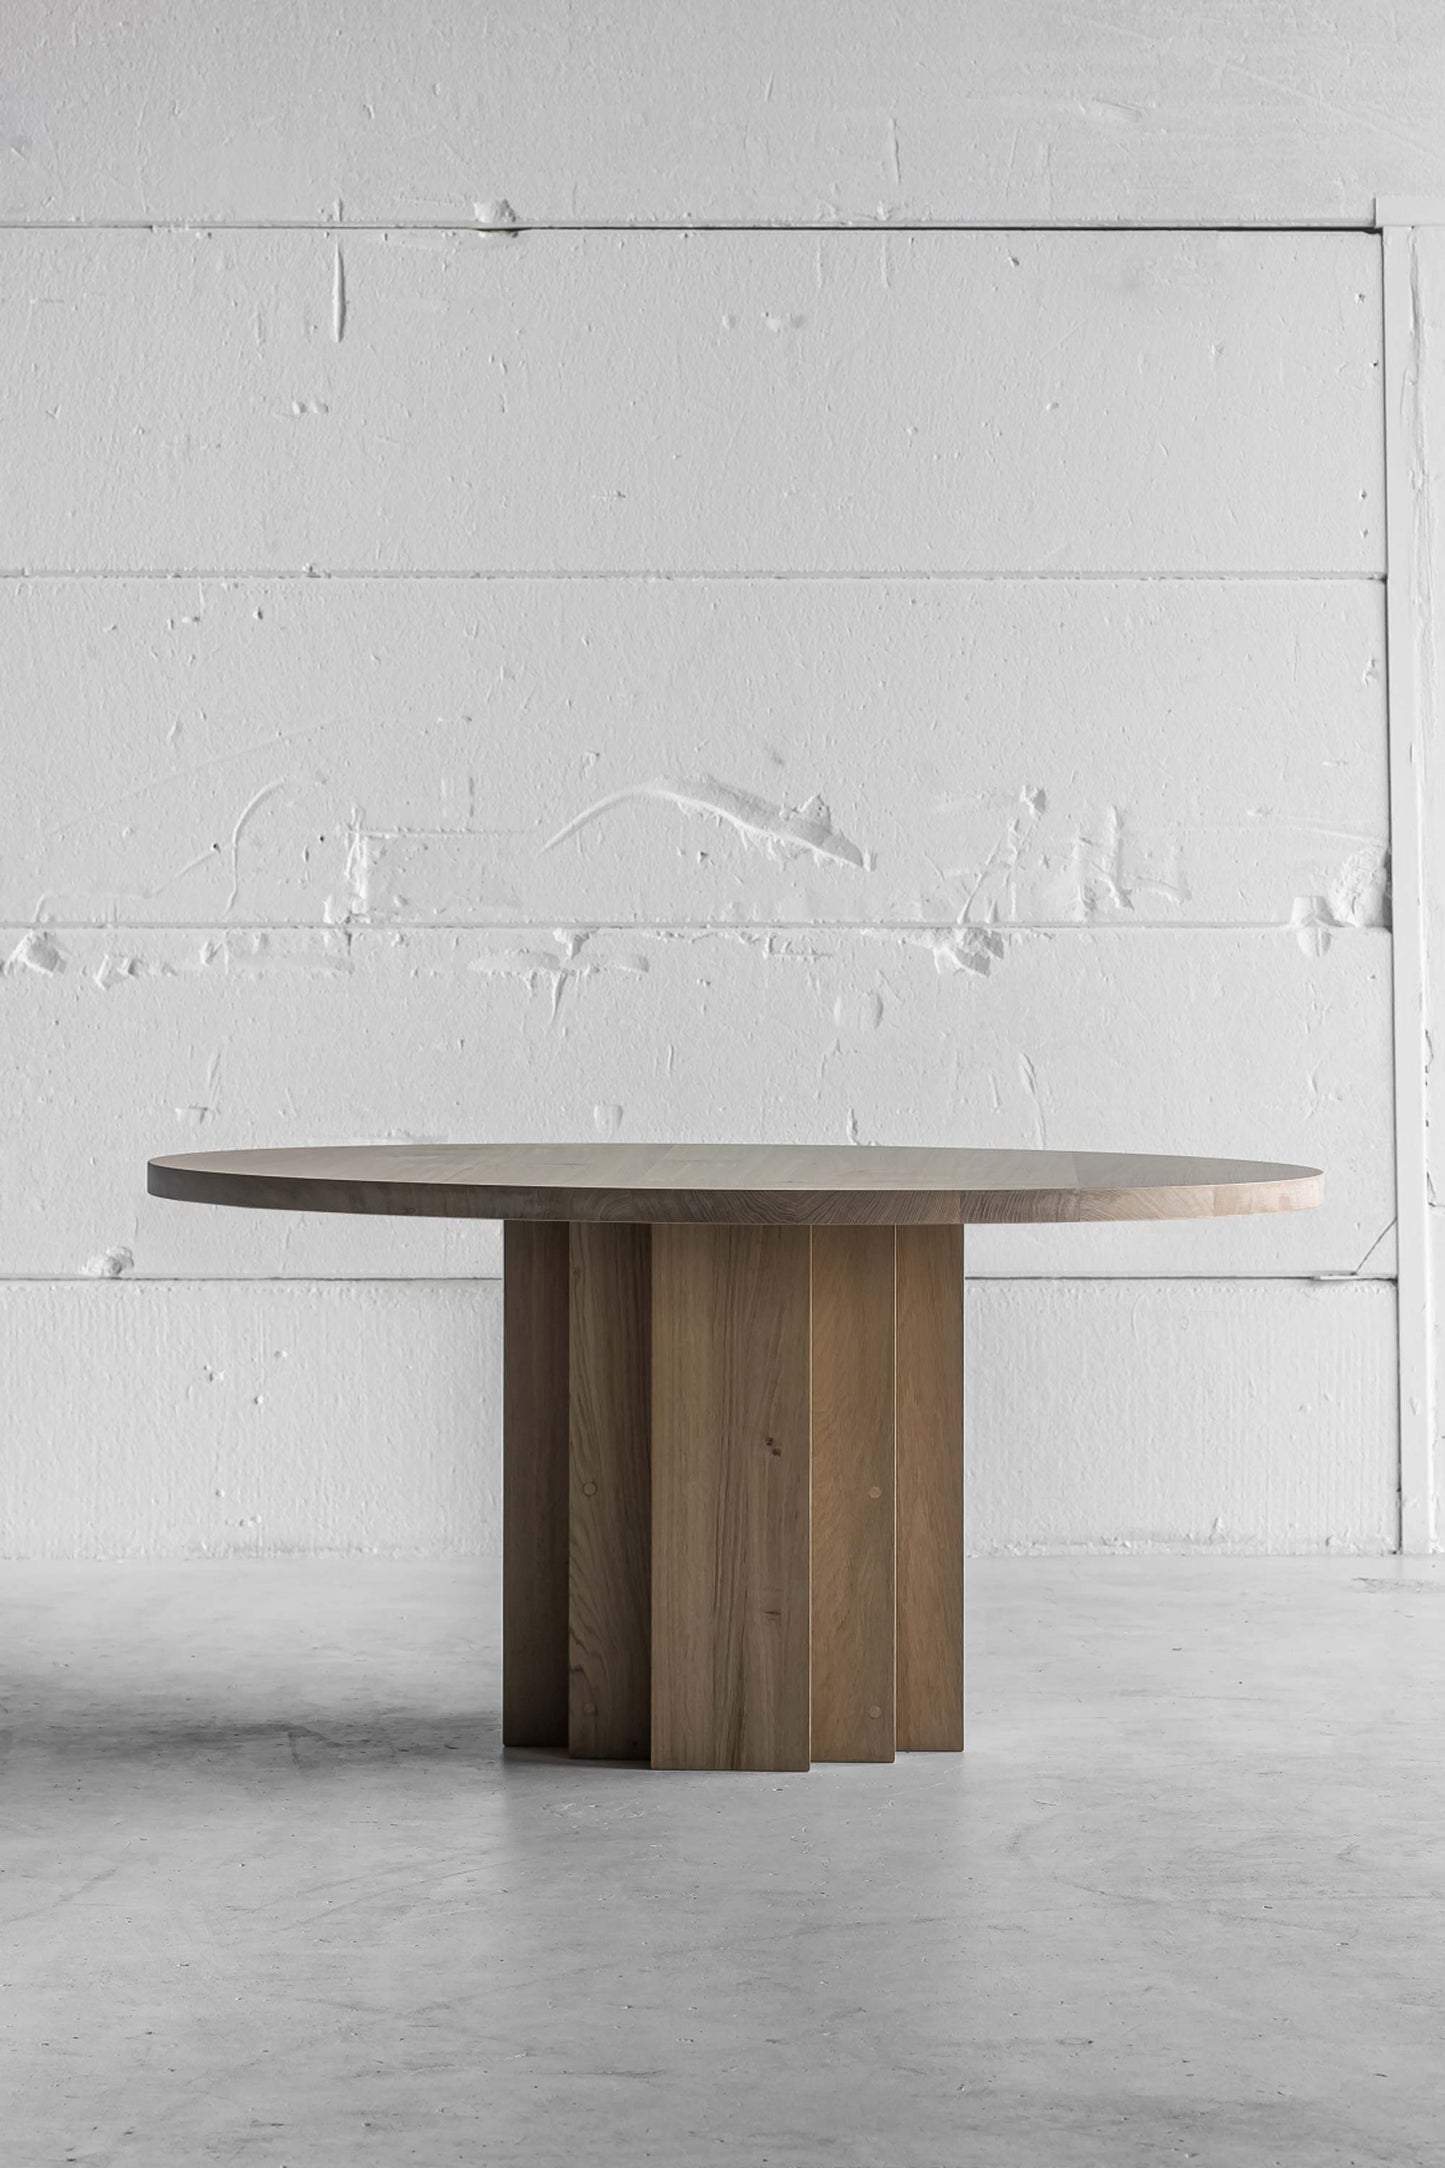 Handcrafted Round Brix Table by Heerenhuis. Round dining table made from Oak wood set in industrial white and light space.